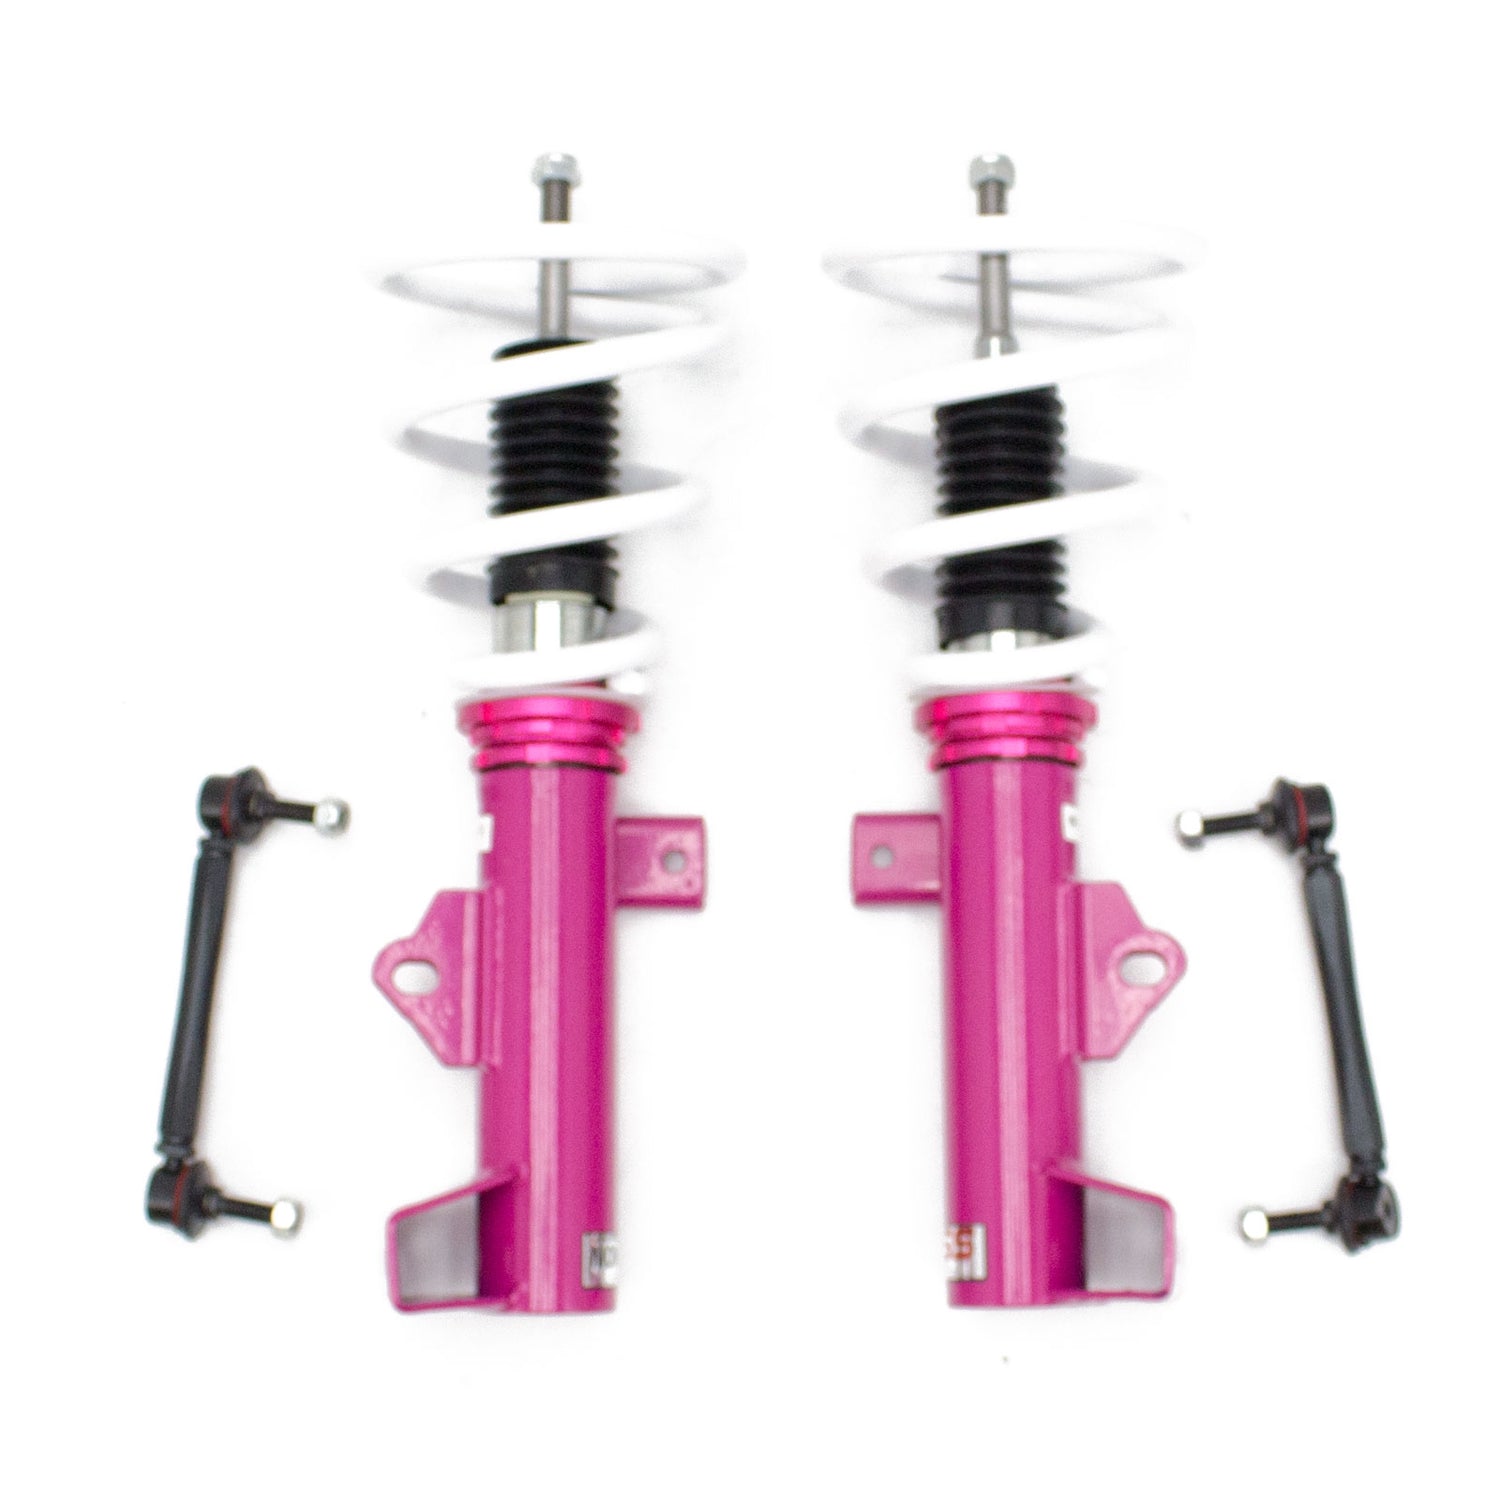 Godspeed(MSS0171-A) MonoSS Coilover Lowering Kit, Fully Adjustable, Ride Height, Spring Tension And 16 Click Damping, Mercedes C-Class(W203) Sedan 2001-07 RWD